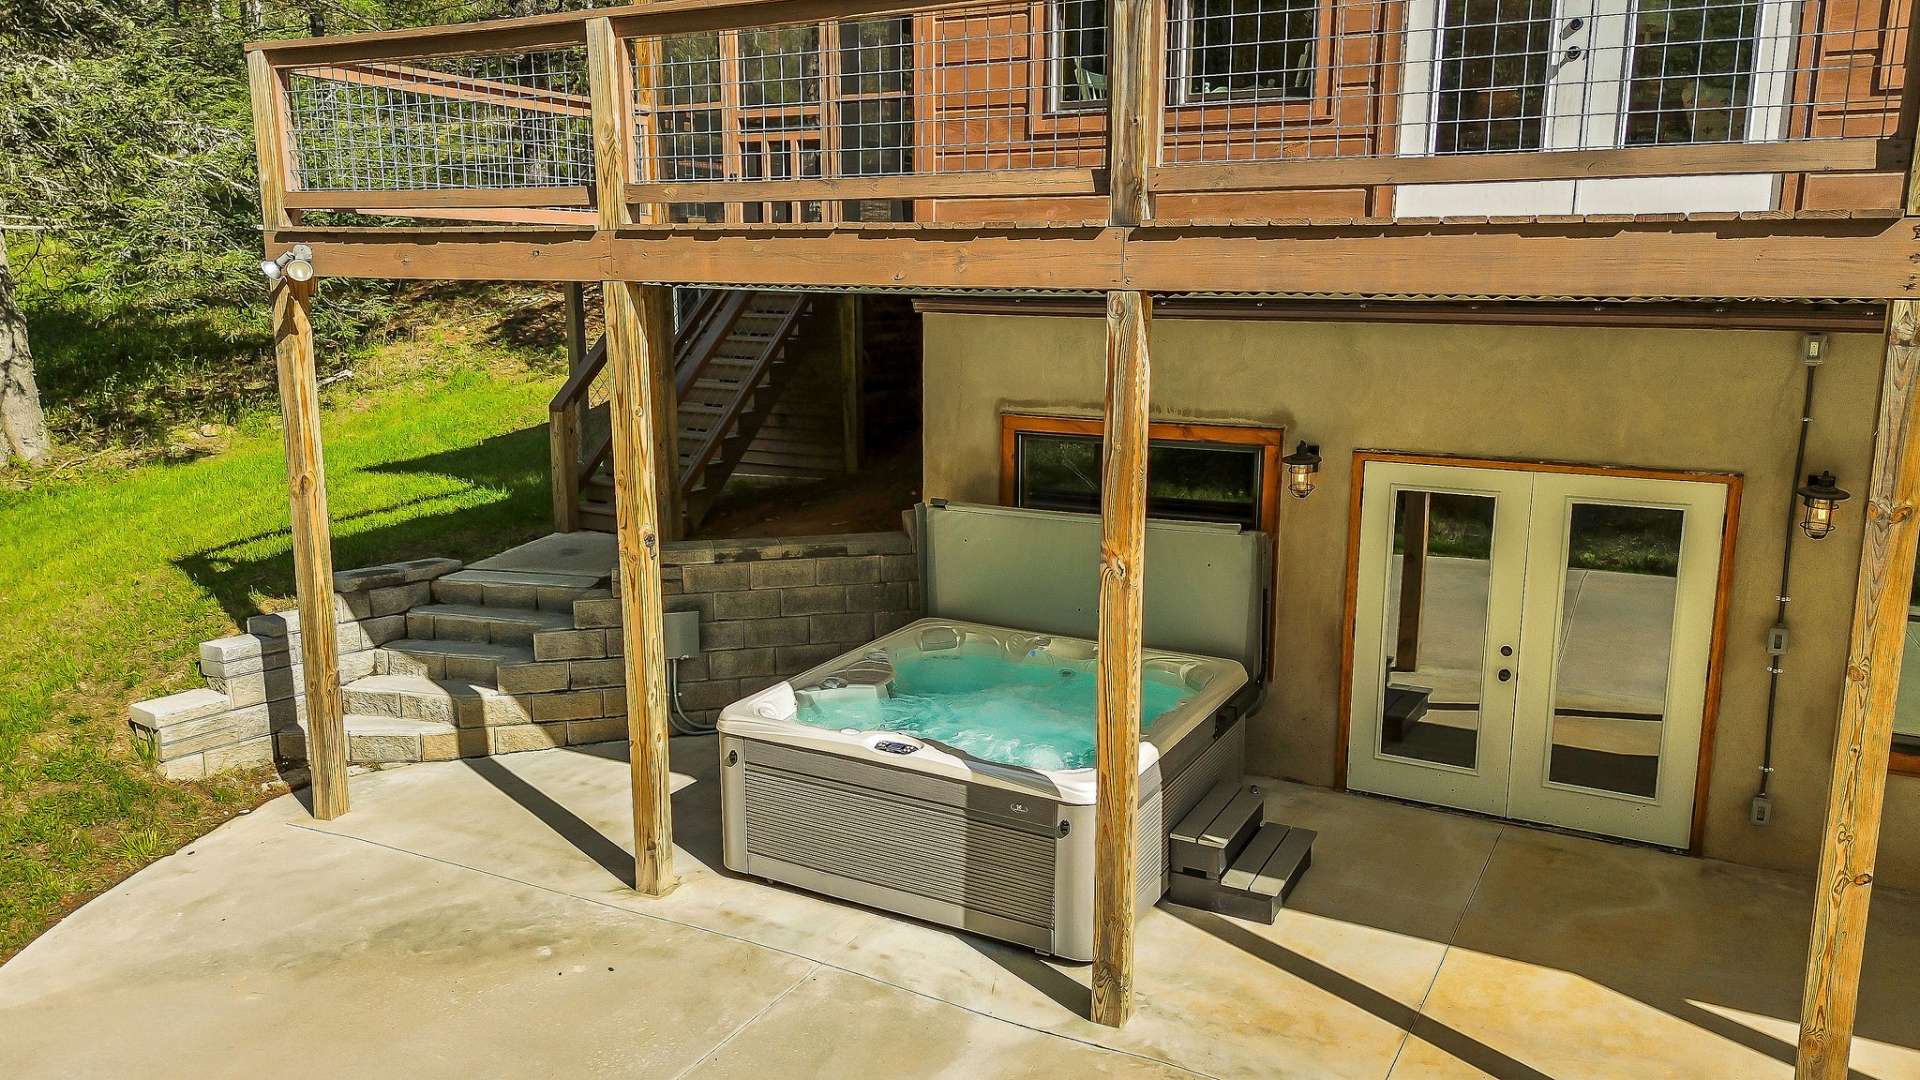 Just outside the family room is the hot tub, inviting you to indulge in a relaxing soak while breathing in the fresh mountain air.